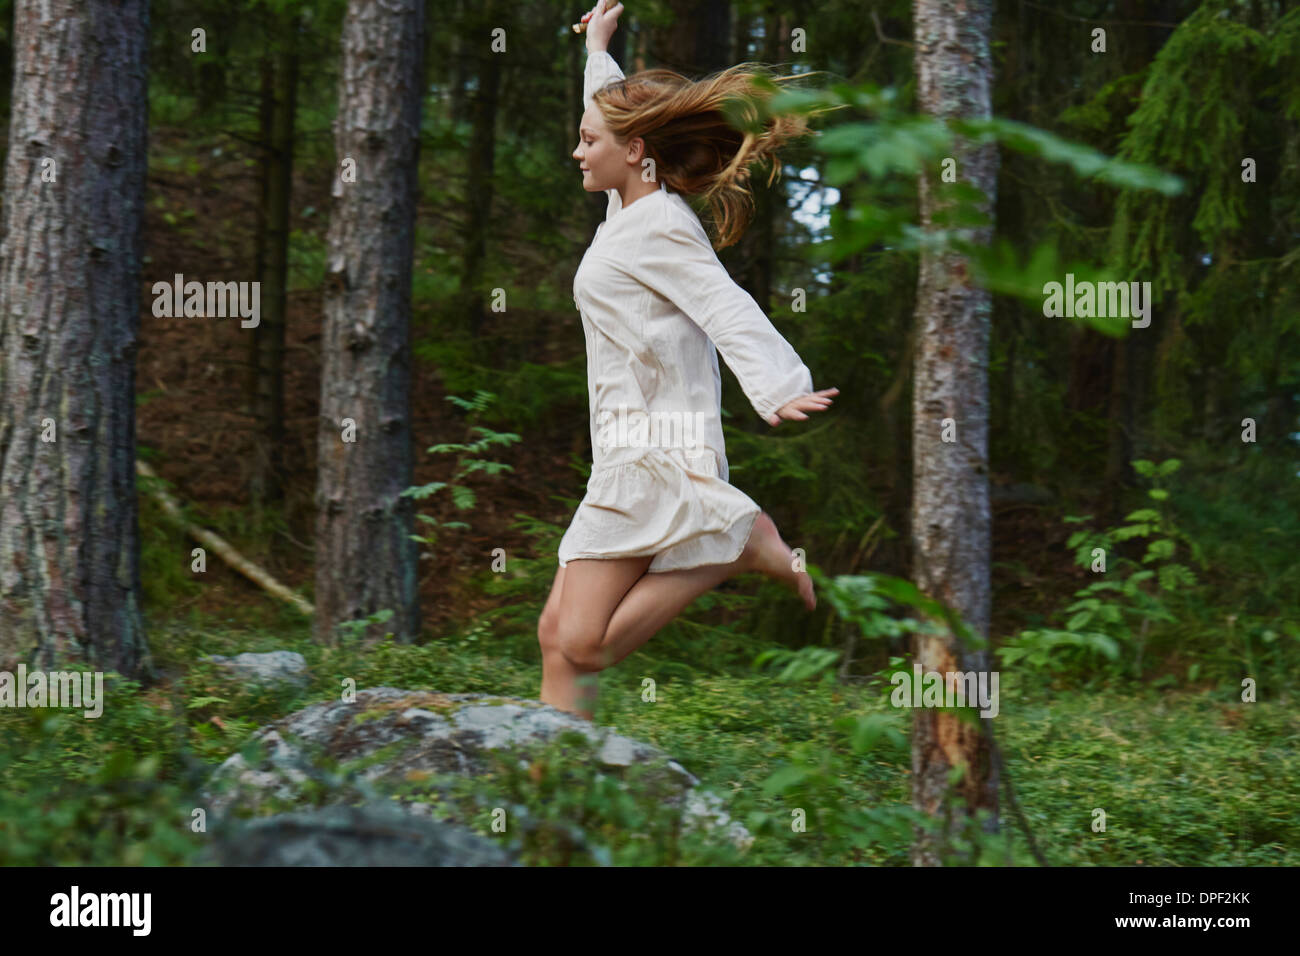 Teenage girl running in forest Stock Photo